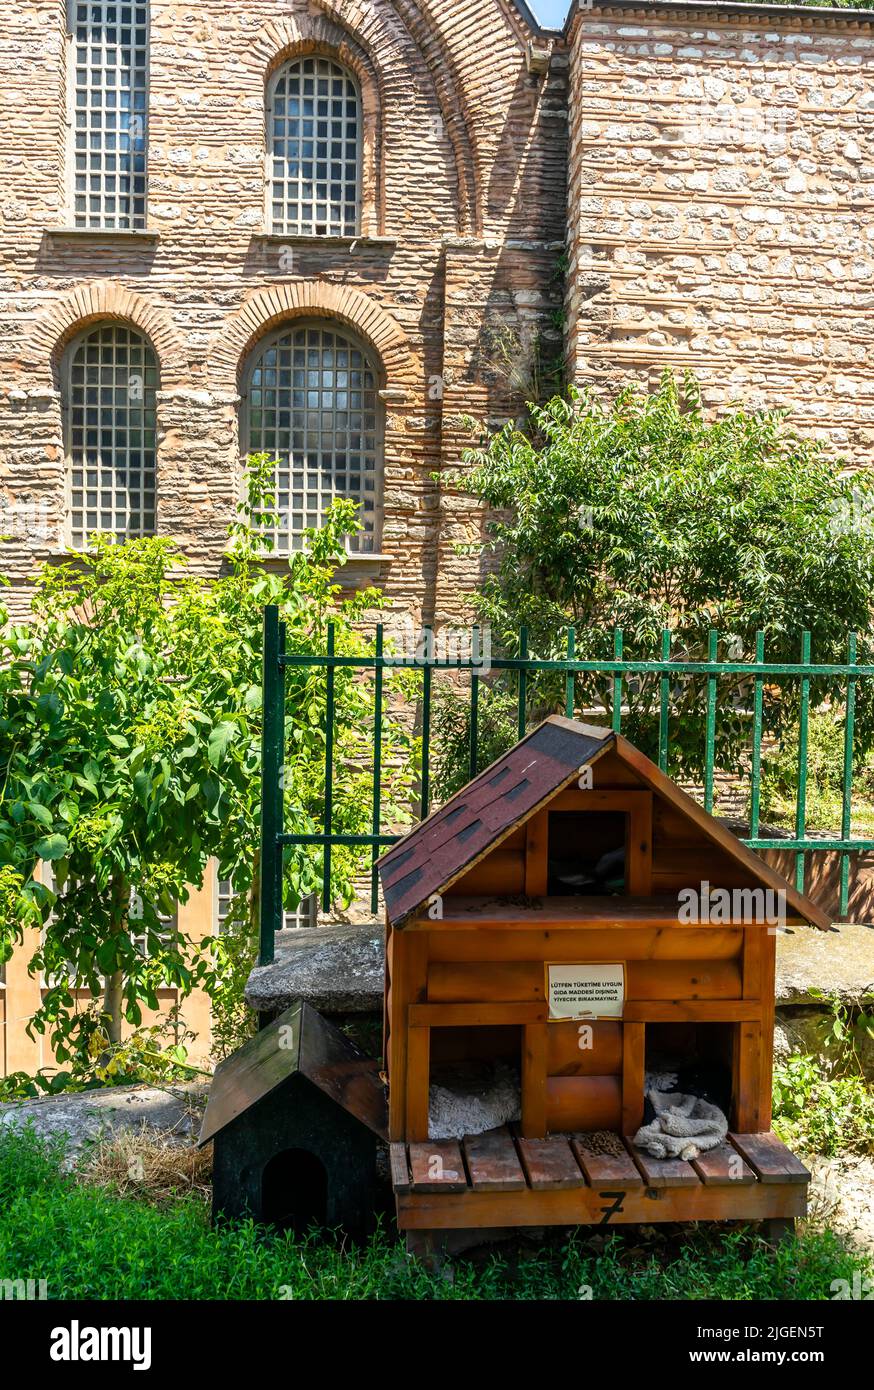 Pets wooden house in Fatih, Istanbul. House for animals installed near historic church with note about feeding pets. Turkey Stock Photo